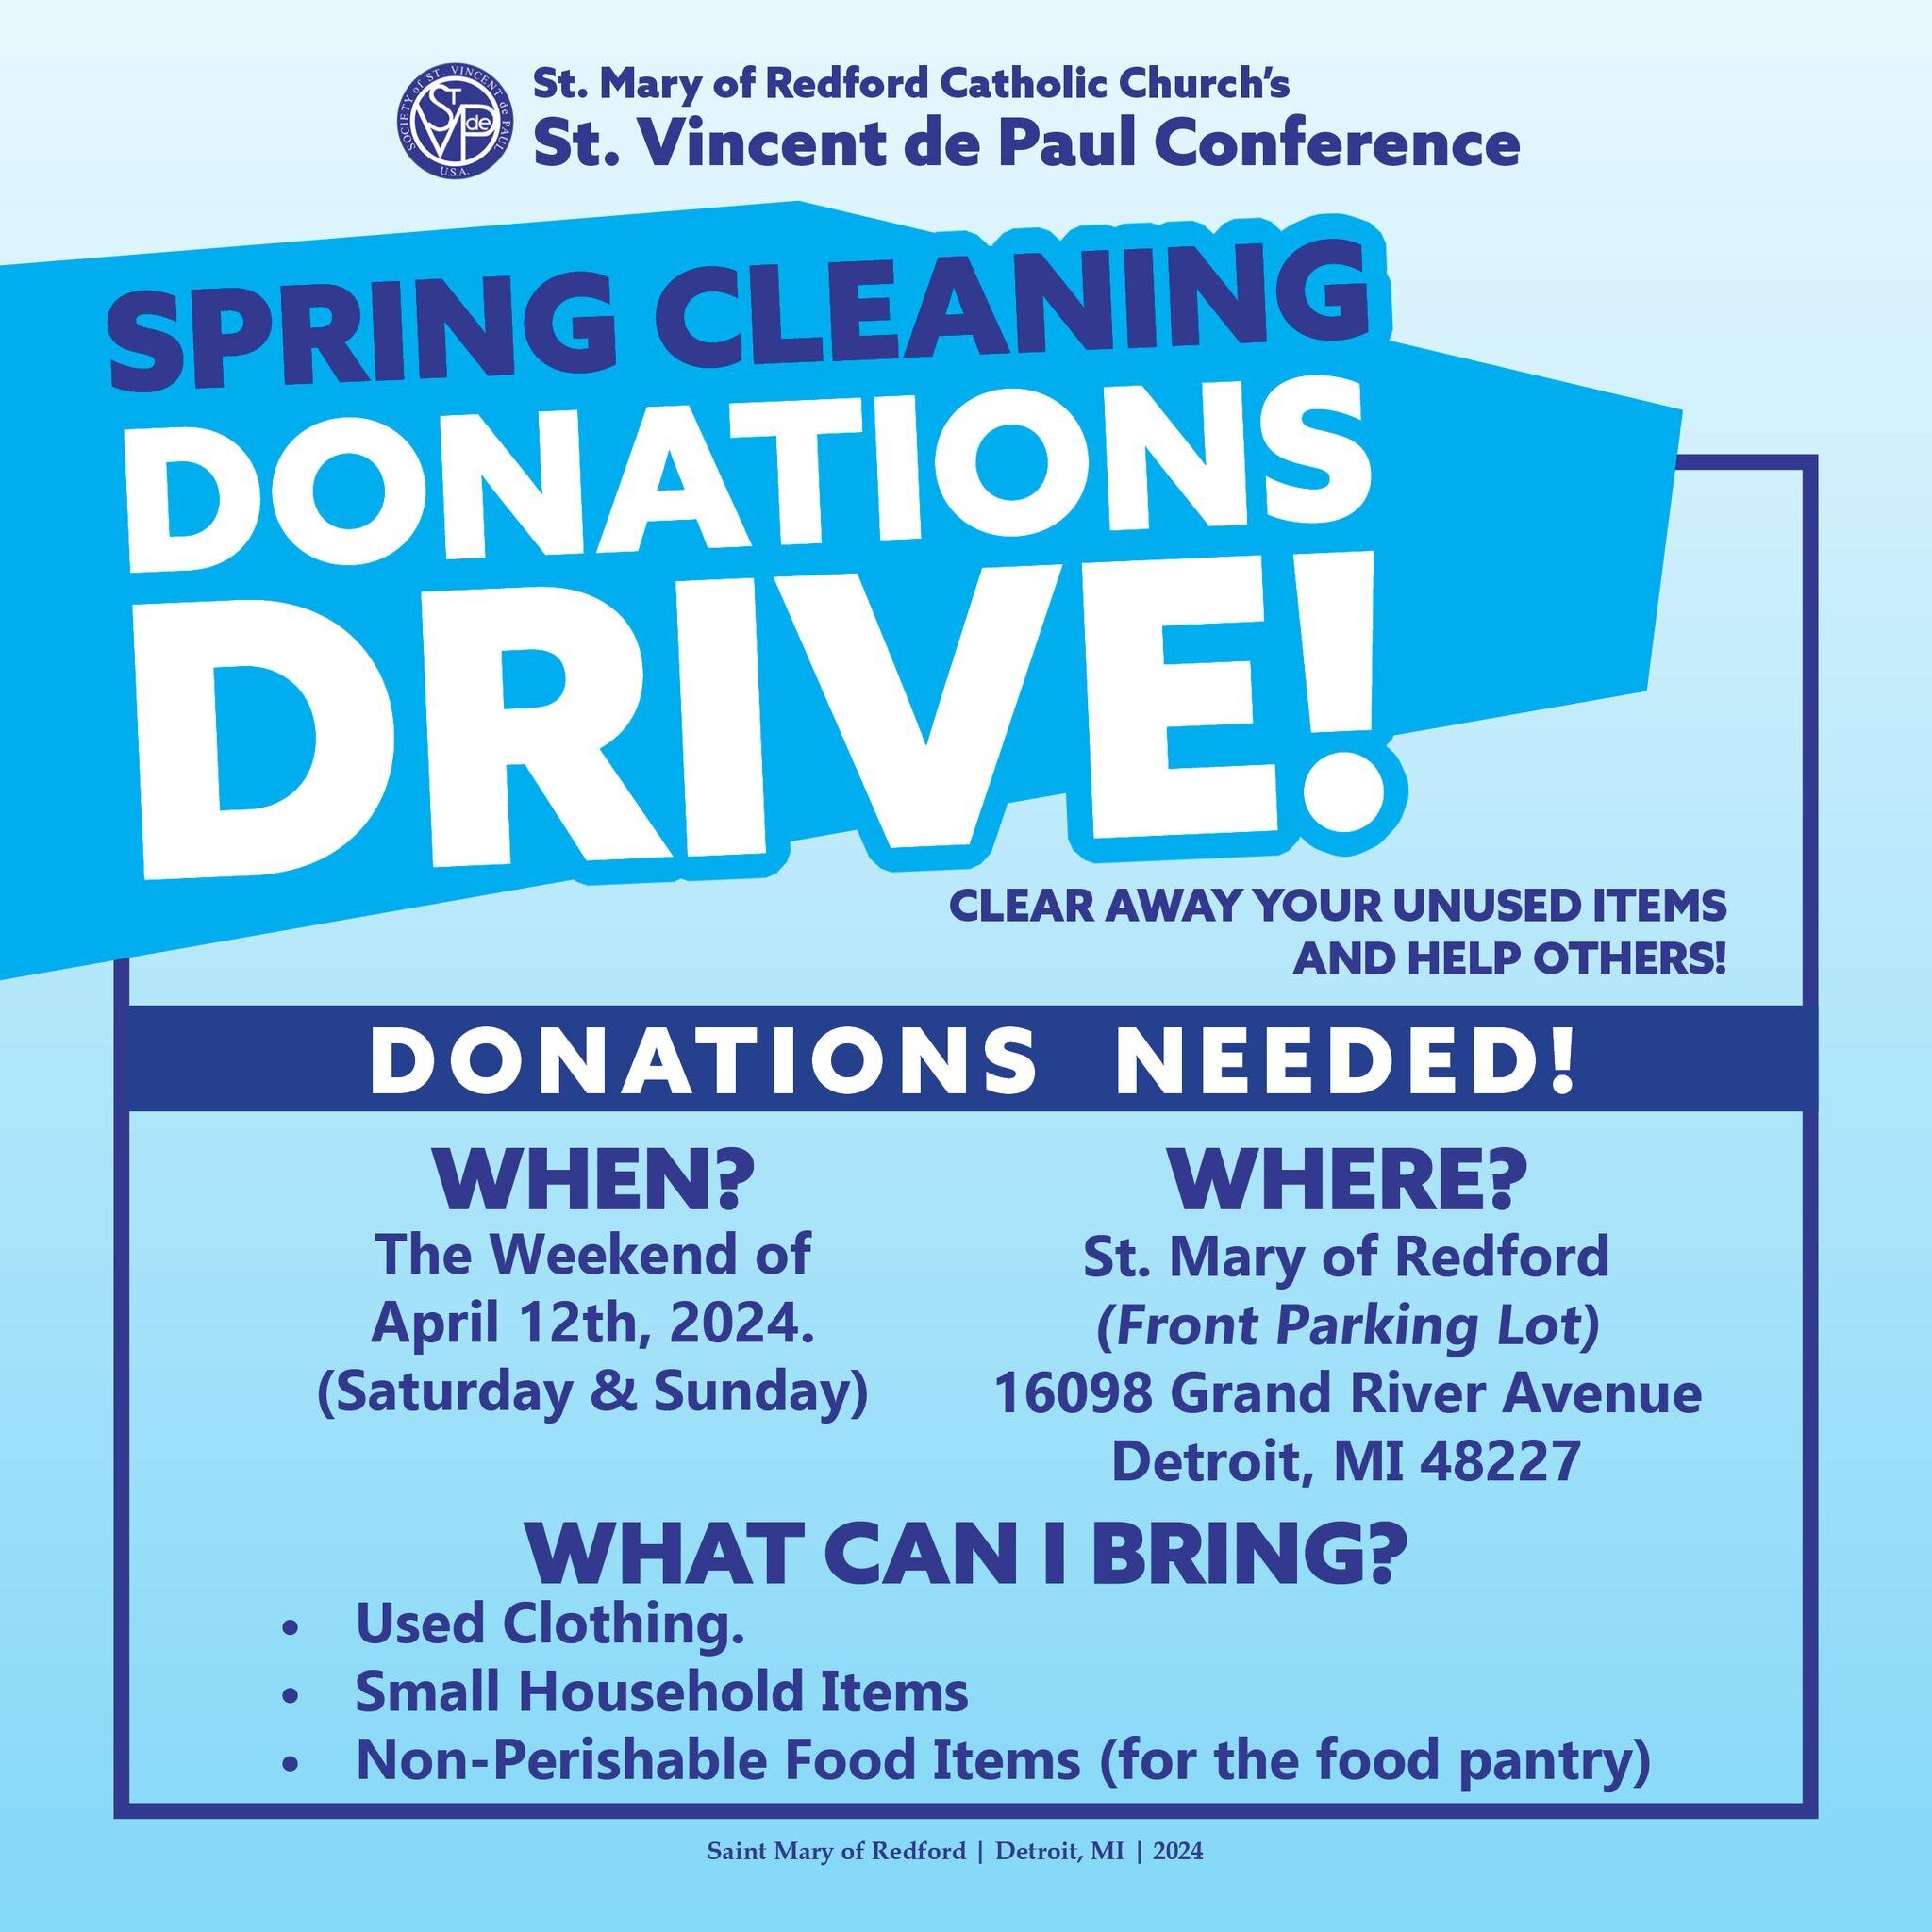 St. Vincent de Paul is looking for Used Clothing, Small Household Items, and more! Come fill the truck!

We're parking a donations truck in the front parking lot to help you with your spring cleaning and to support SVdP change lives in the process! I